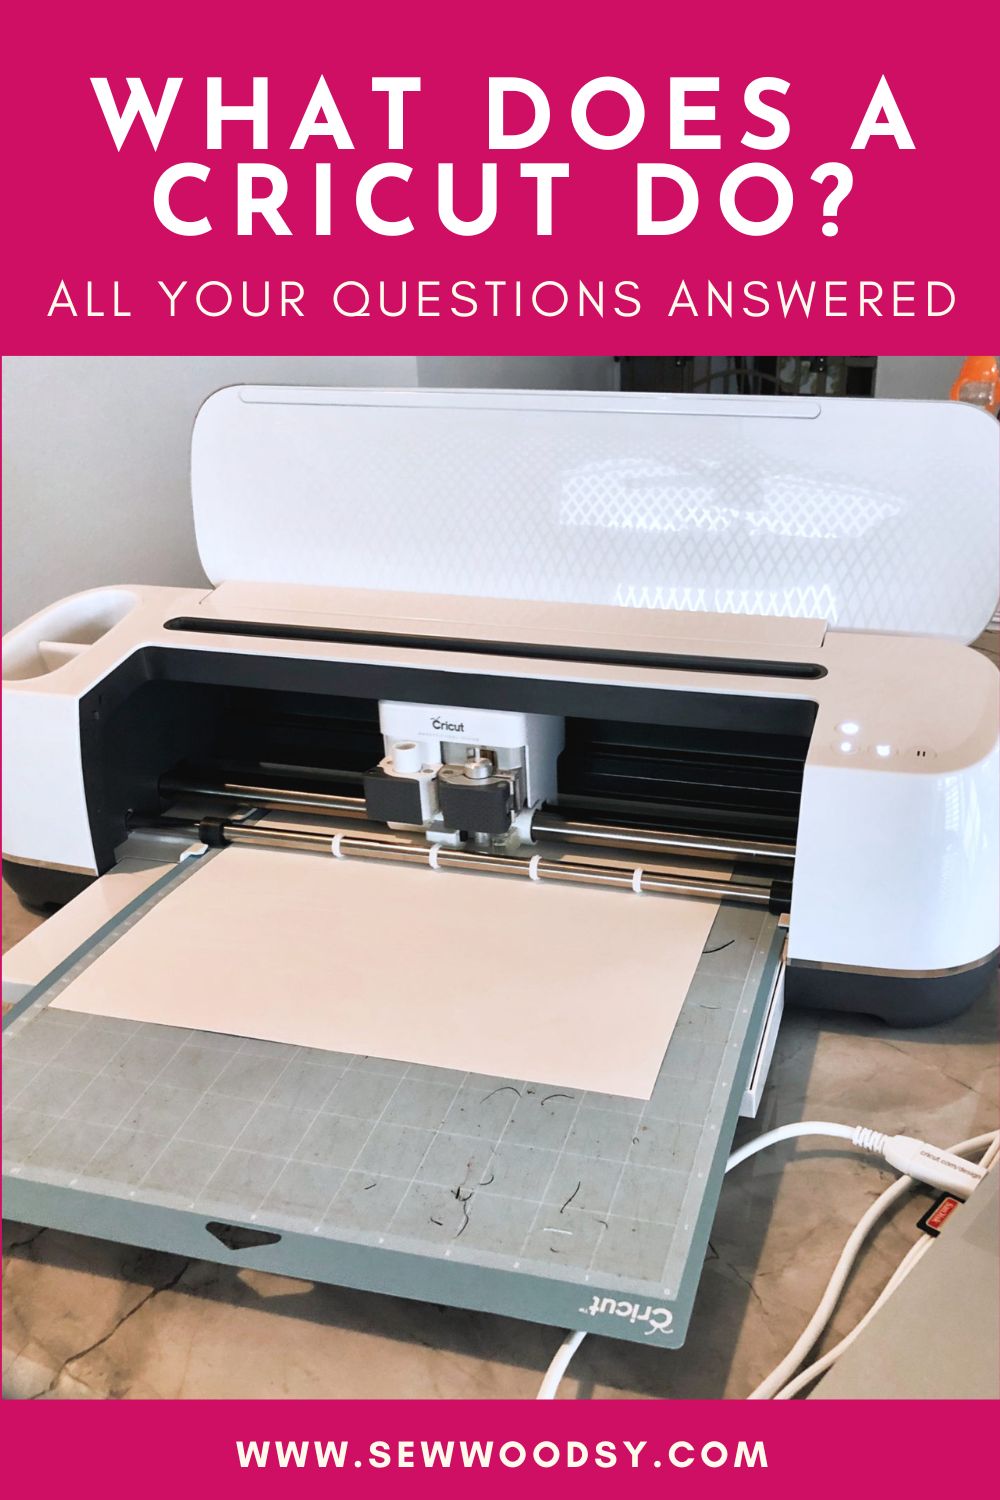 White Cricut machine with post title text on image for Pinterest.